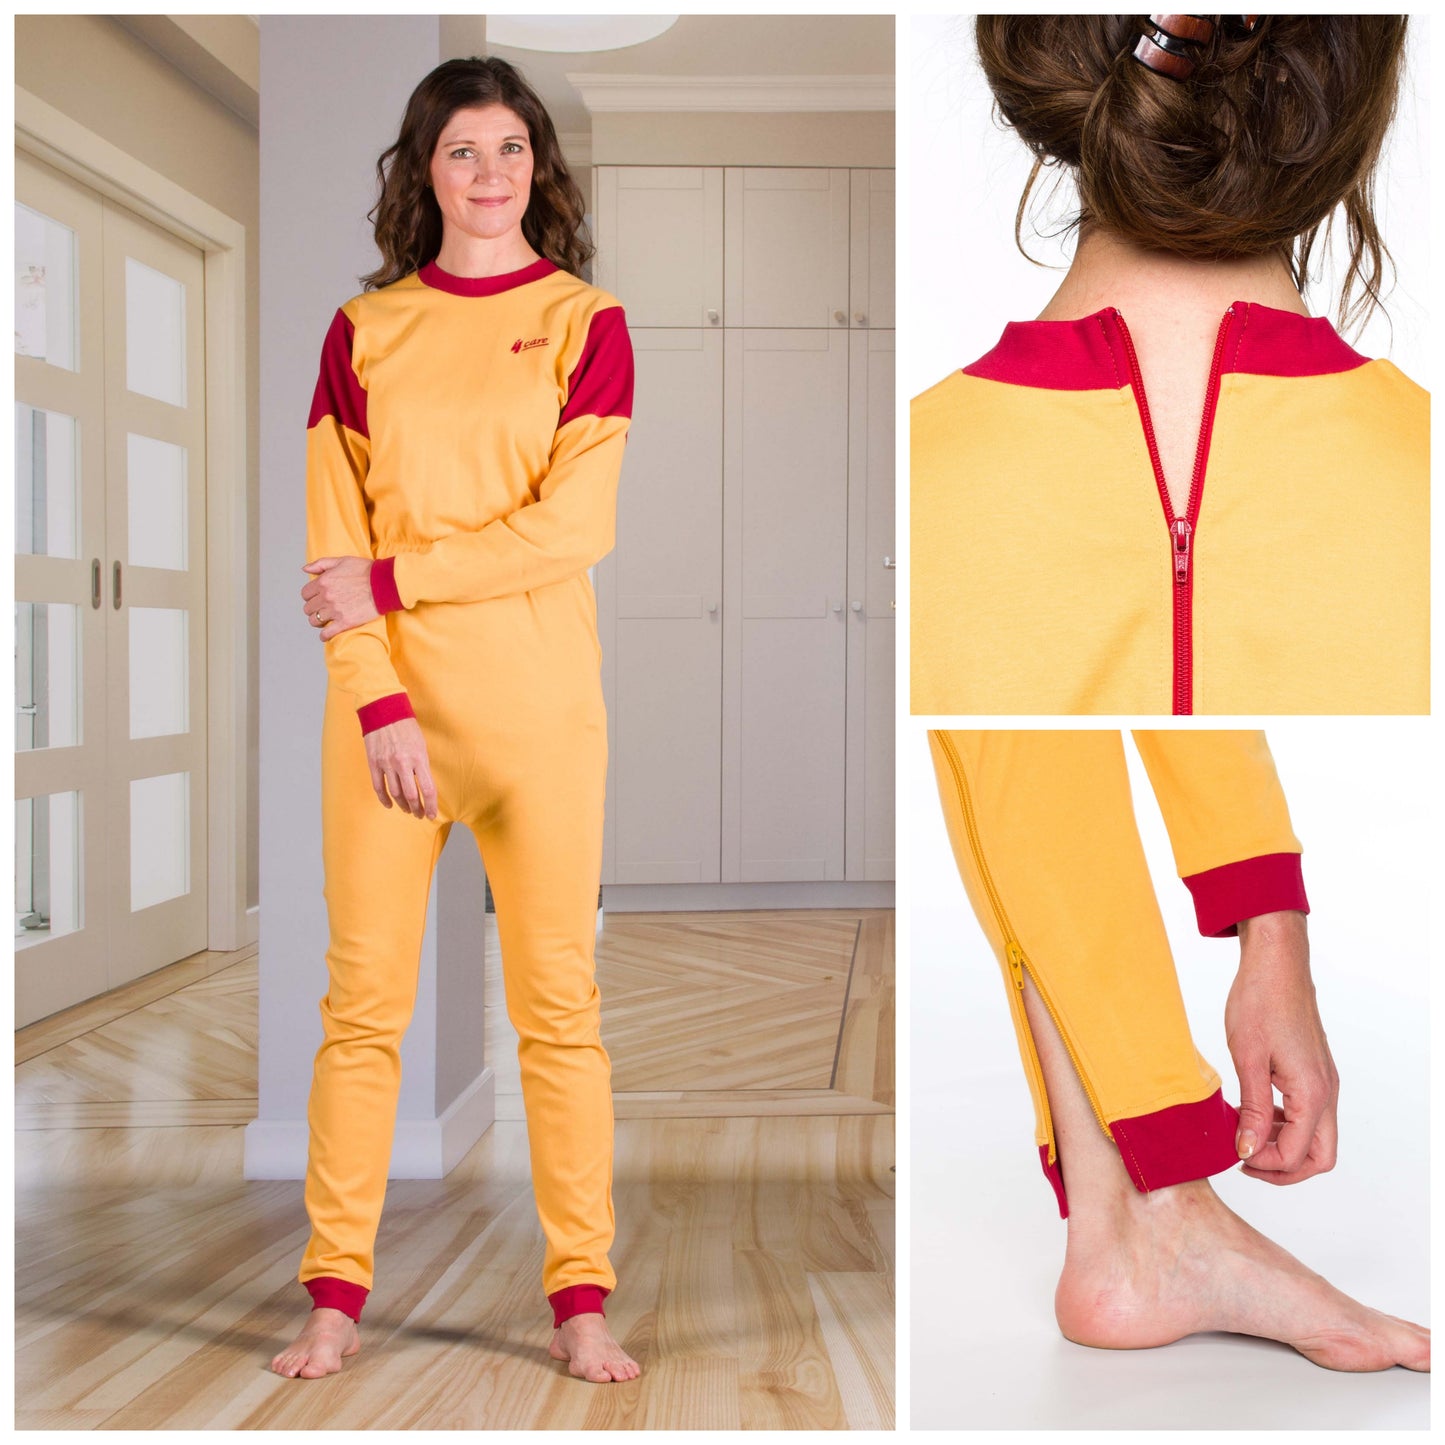 Unisex Jumpsuit: Long Sleeves Leggings - Zip Up The Back - Optional Zip In The Crotch (4332)